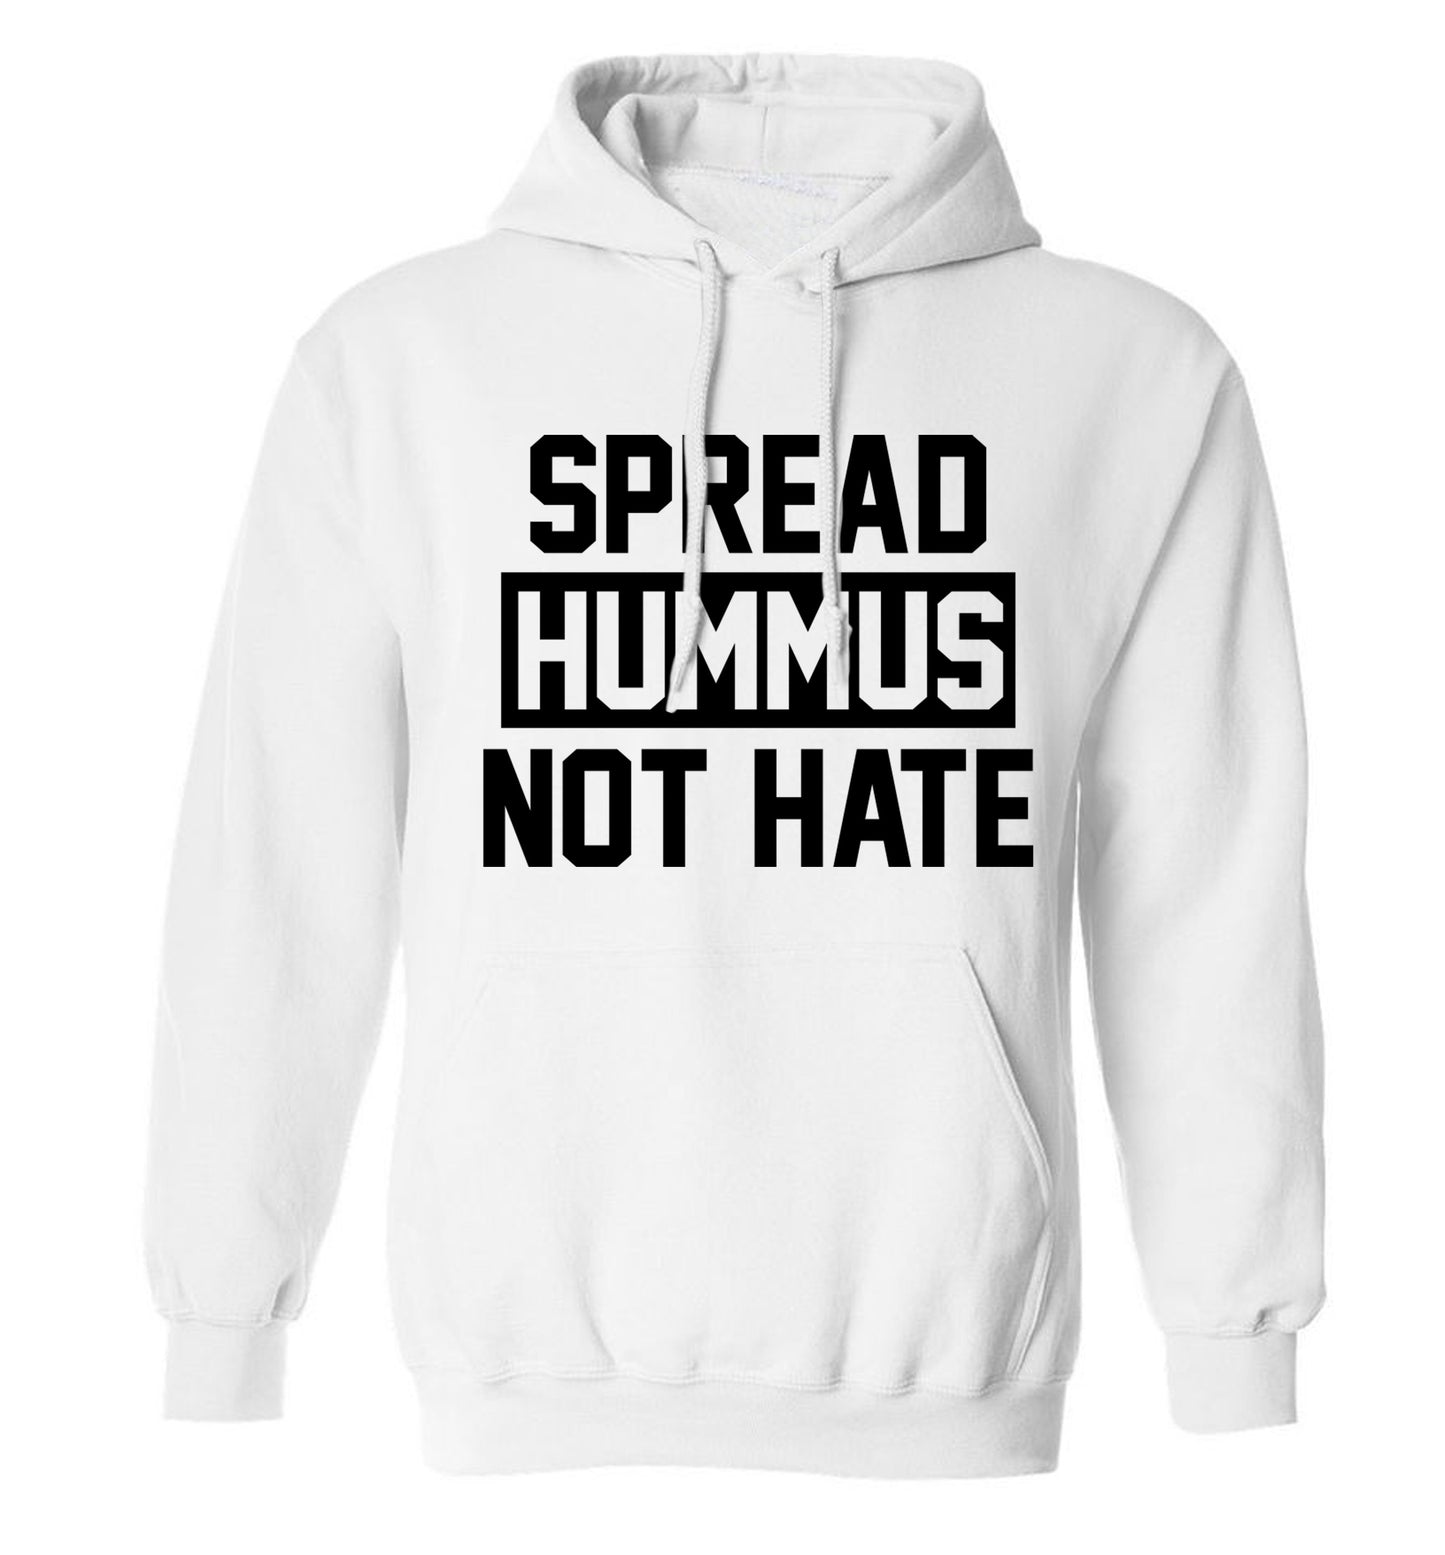 Spread hummus not hate adults unisex white hoodie 2XL